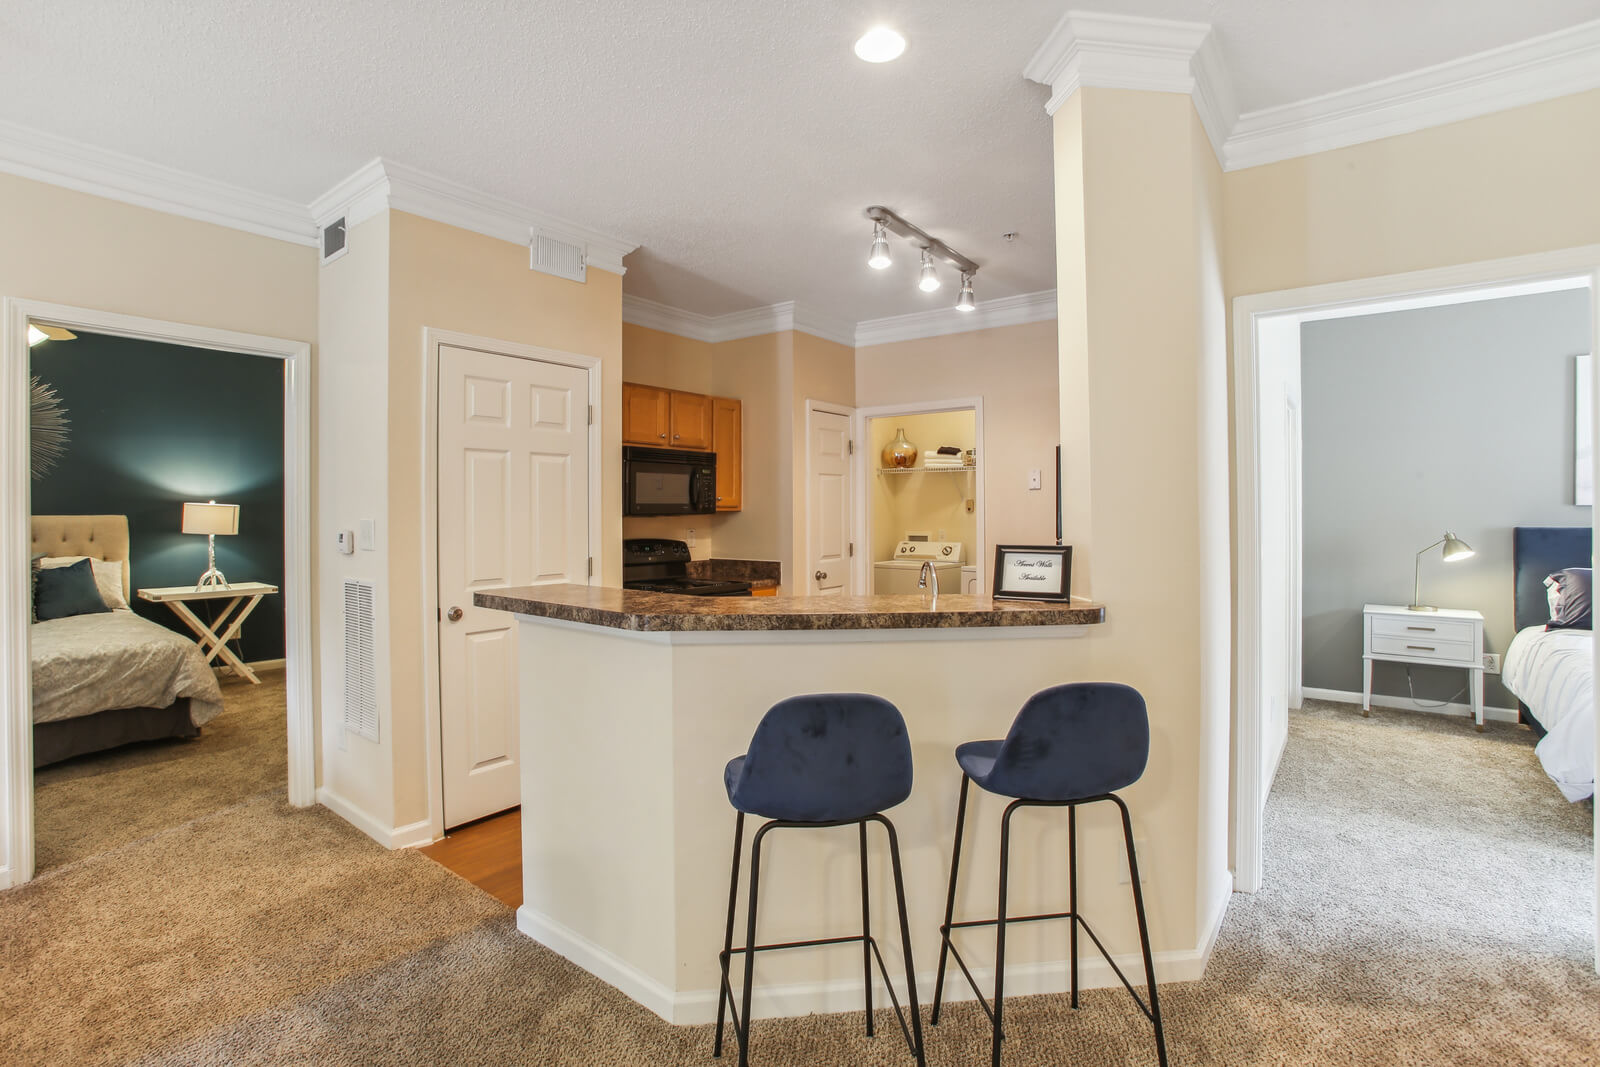 model kitchen with breakfast bar and ample lighting, showing two bedrooms, one on each side of kitchen